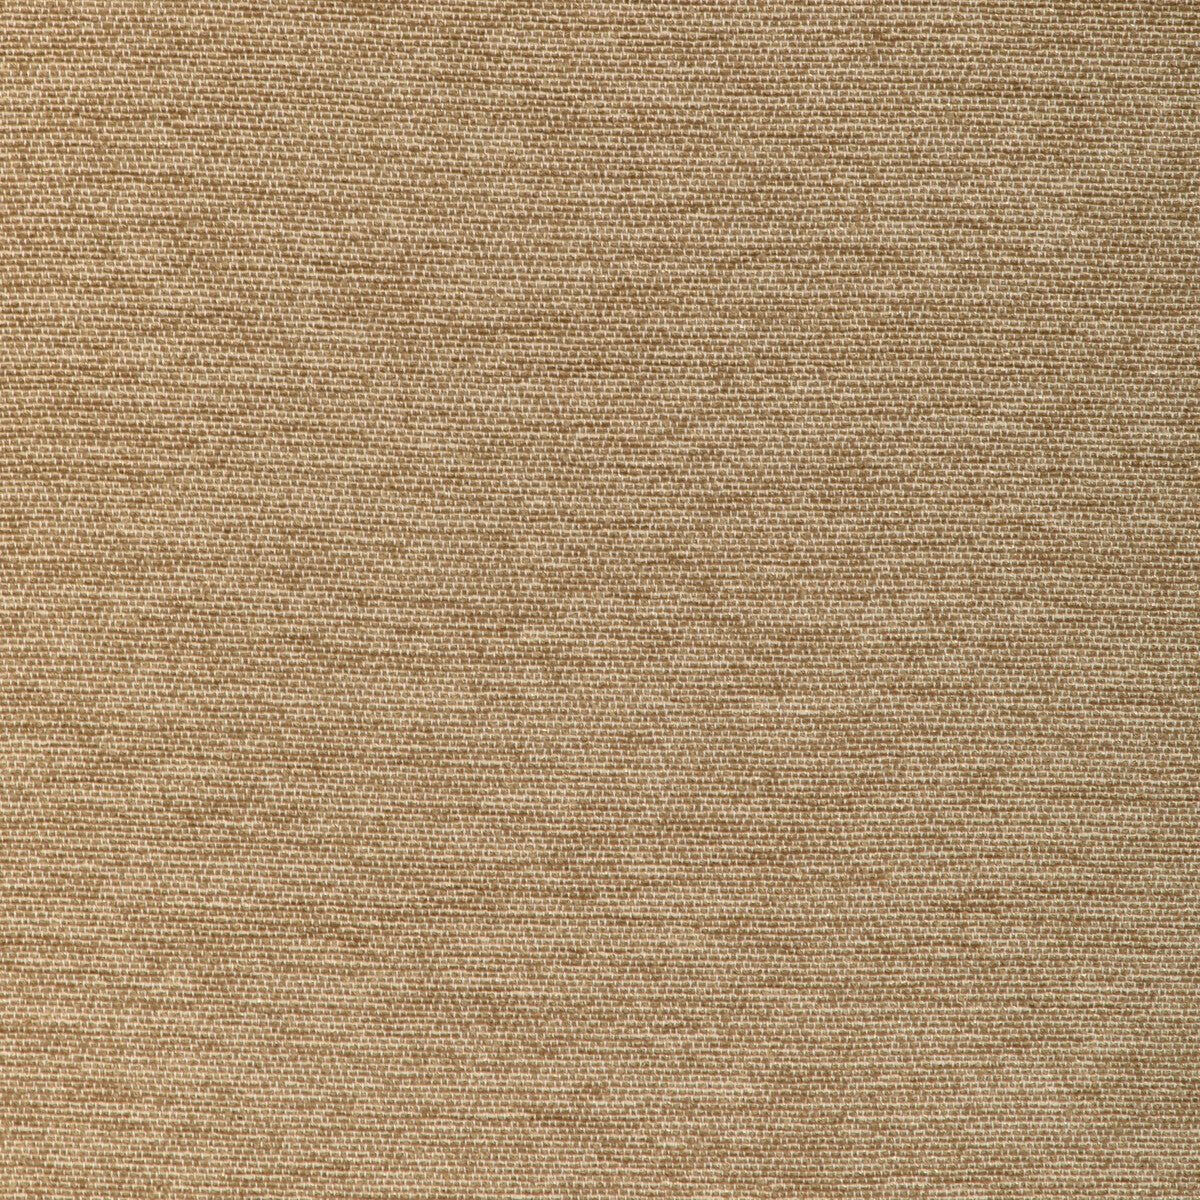 Beauvoir Texture fabric in beige color - pattern 8023153.116.0 - by Brunschwig &amp; Fils in the Chambery Textures IV collection